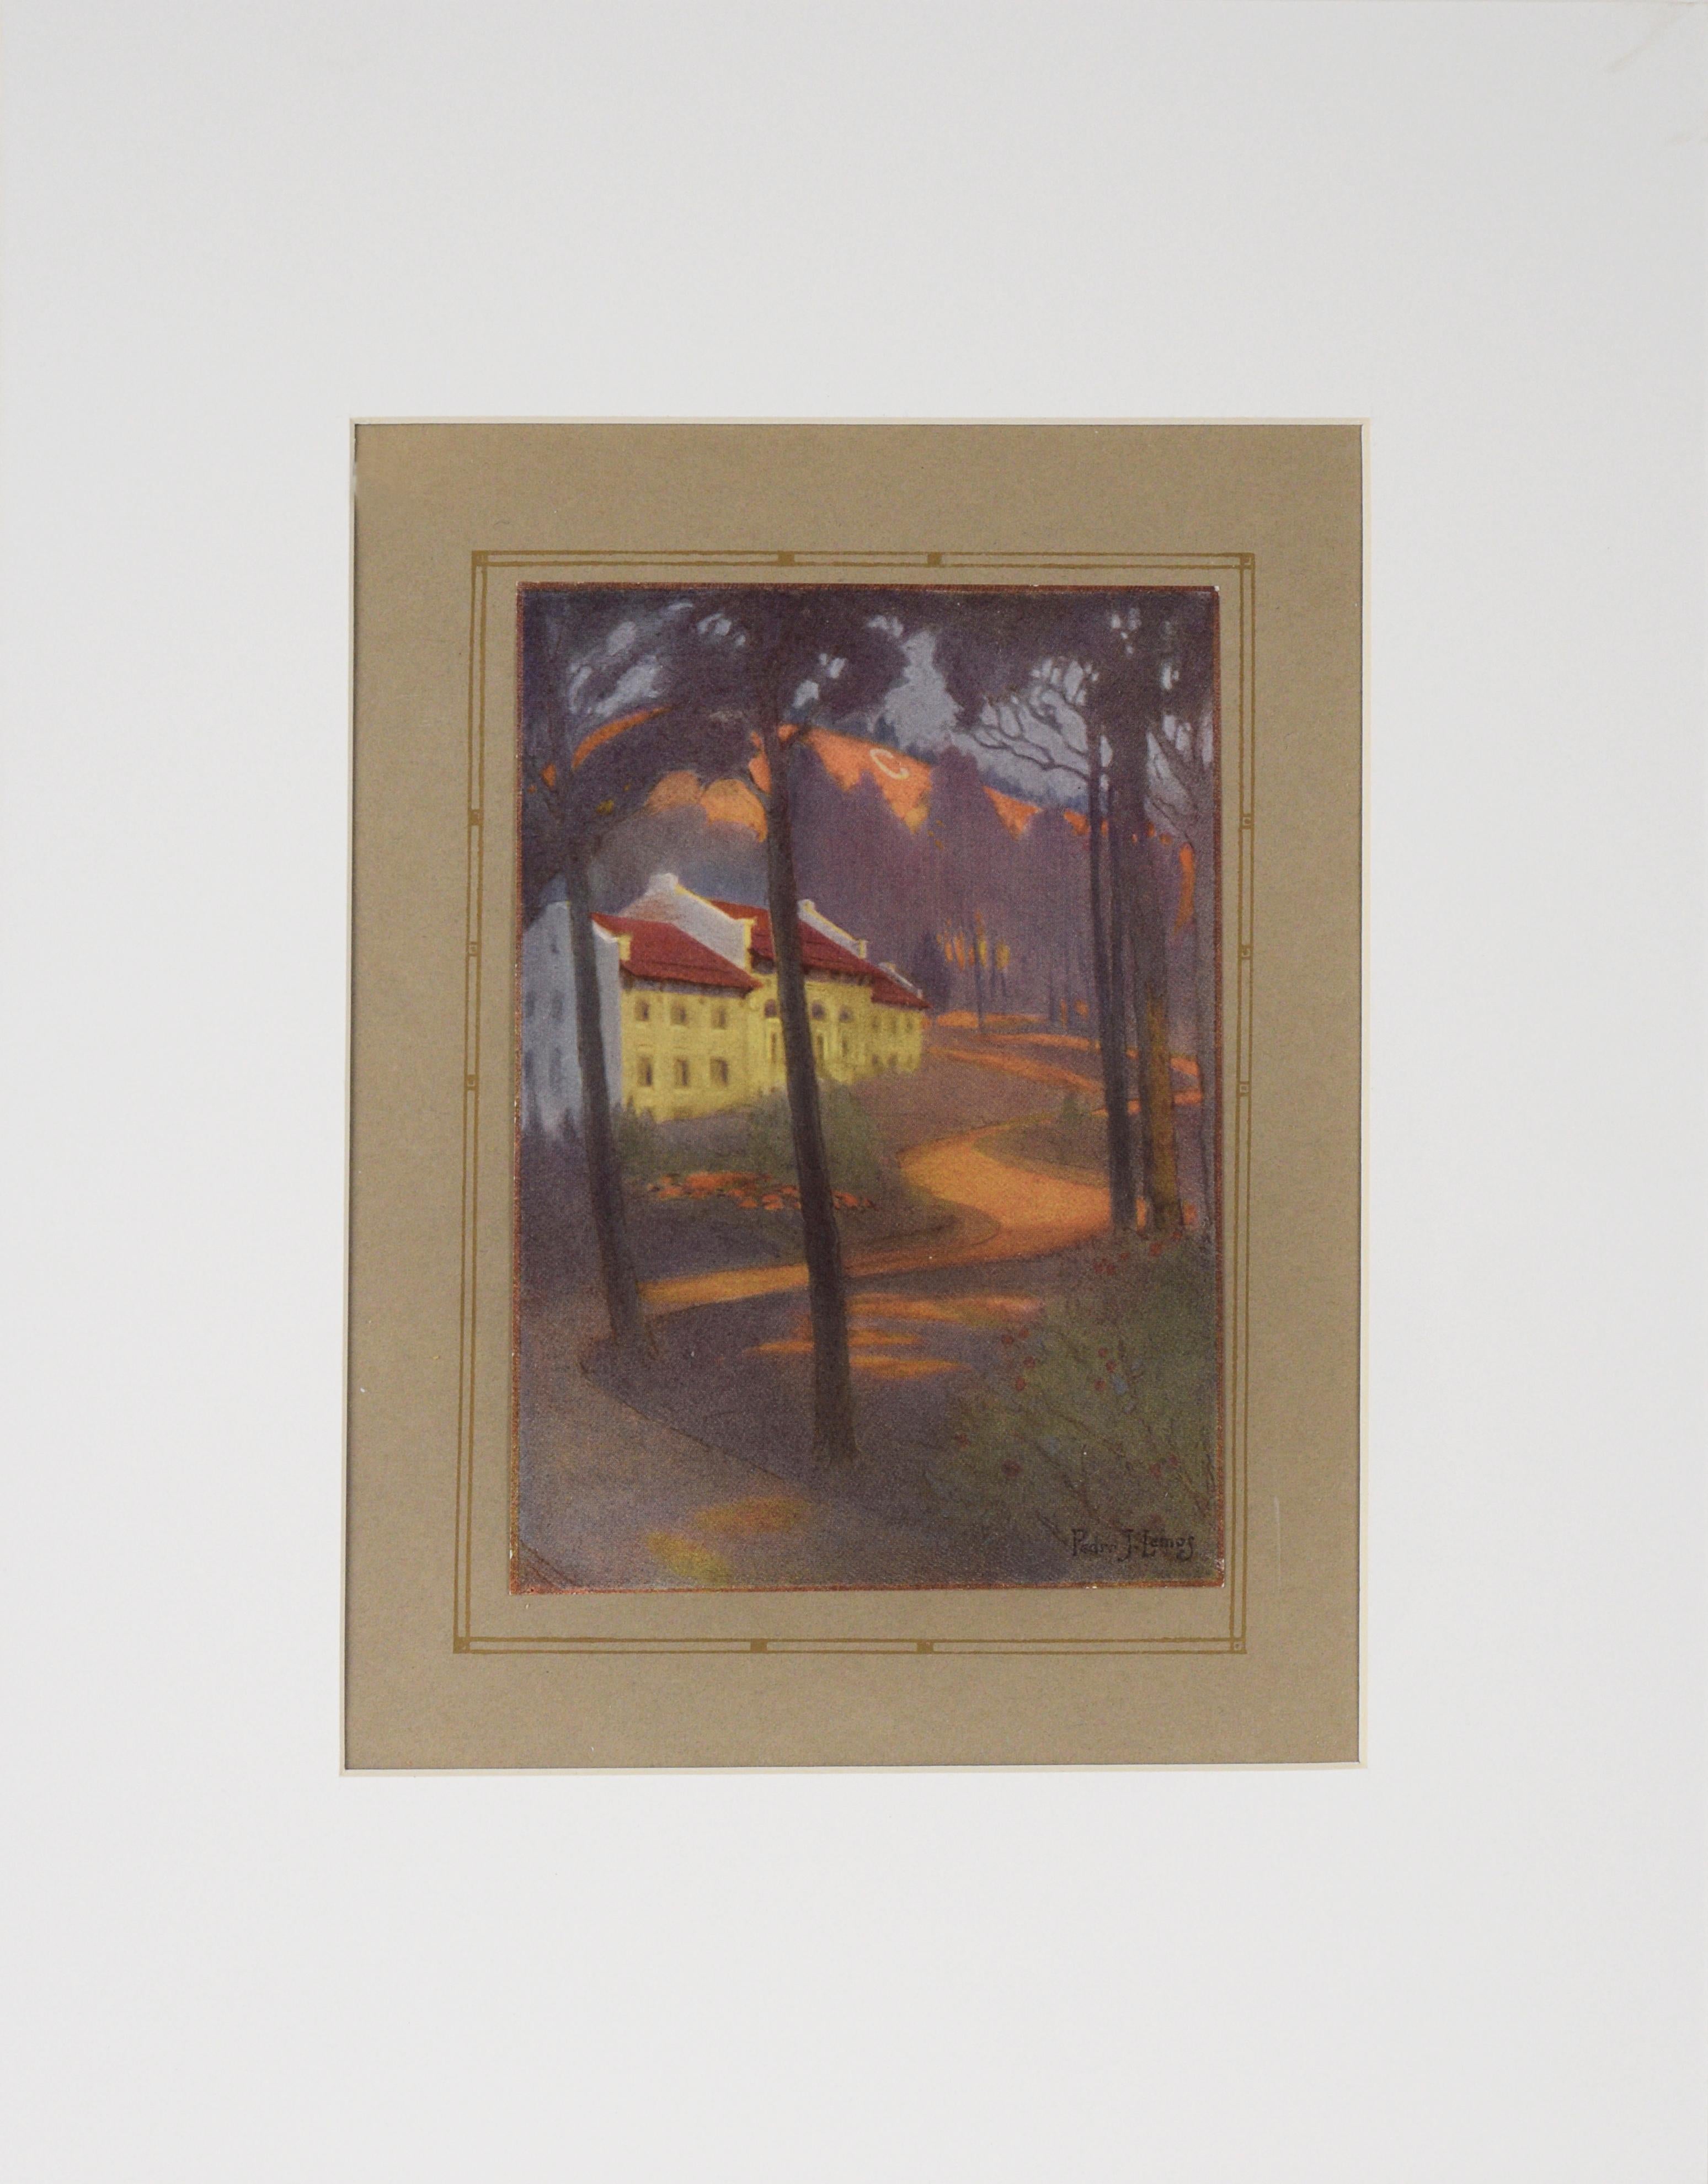 Pedro Lemos Landscape Print - "The Mining Building From The Road" - 1921 UC Berkeley Yearbook Color Lithograph